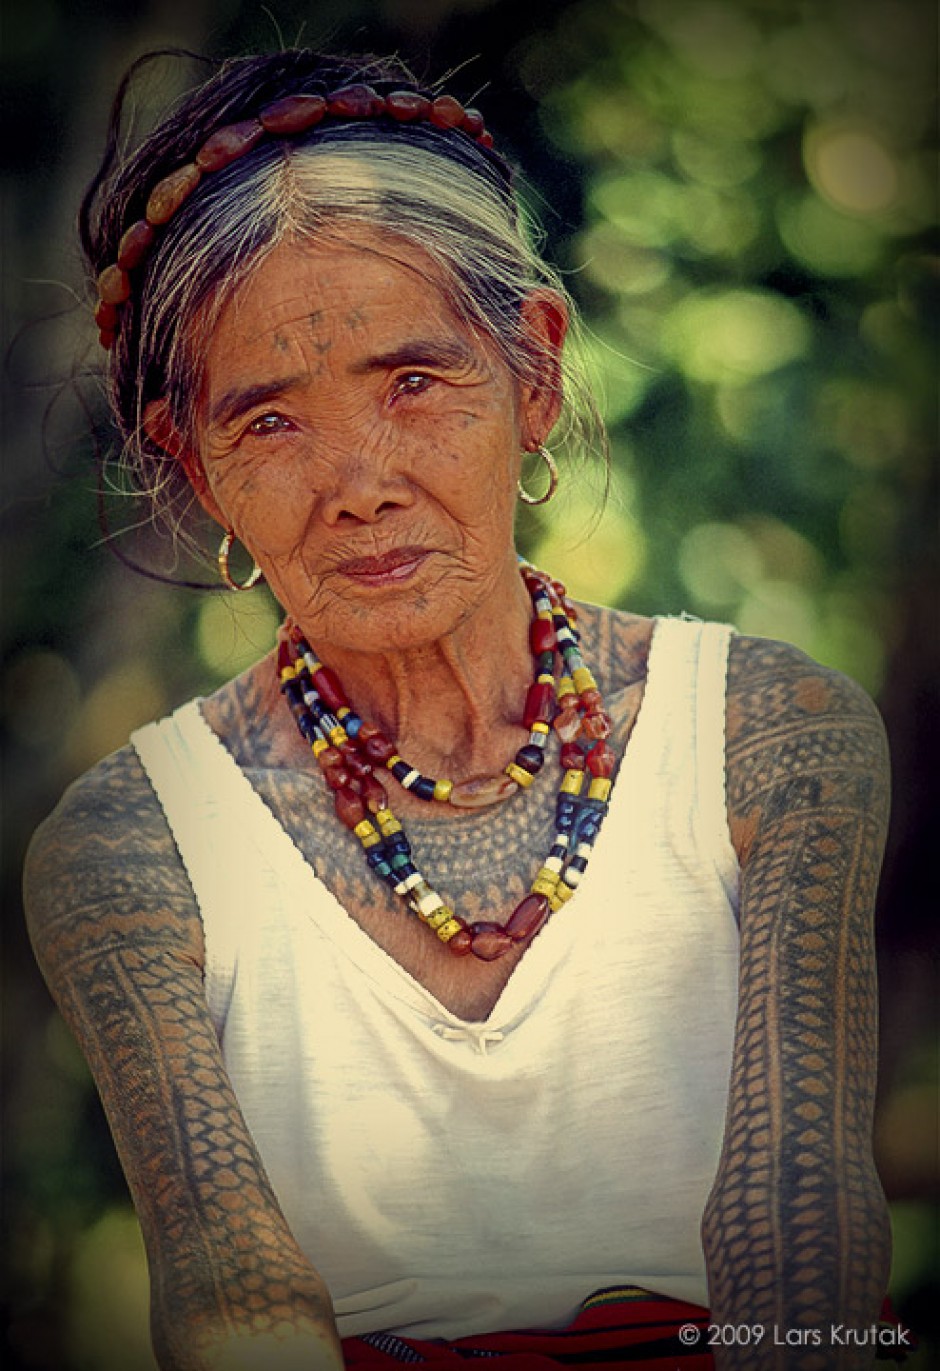 Vogue Philippines oldest cover star is tattoo artist WhangOd aged 106